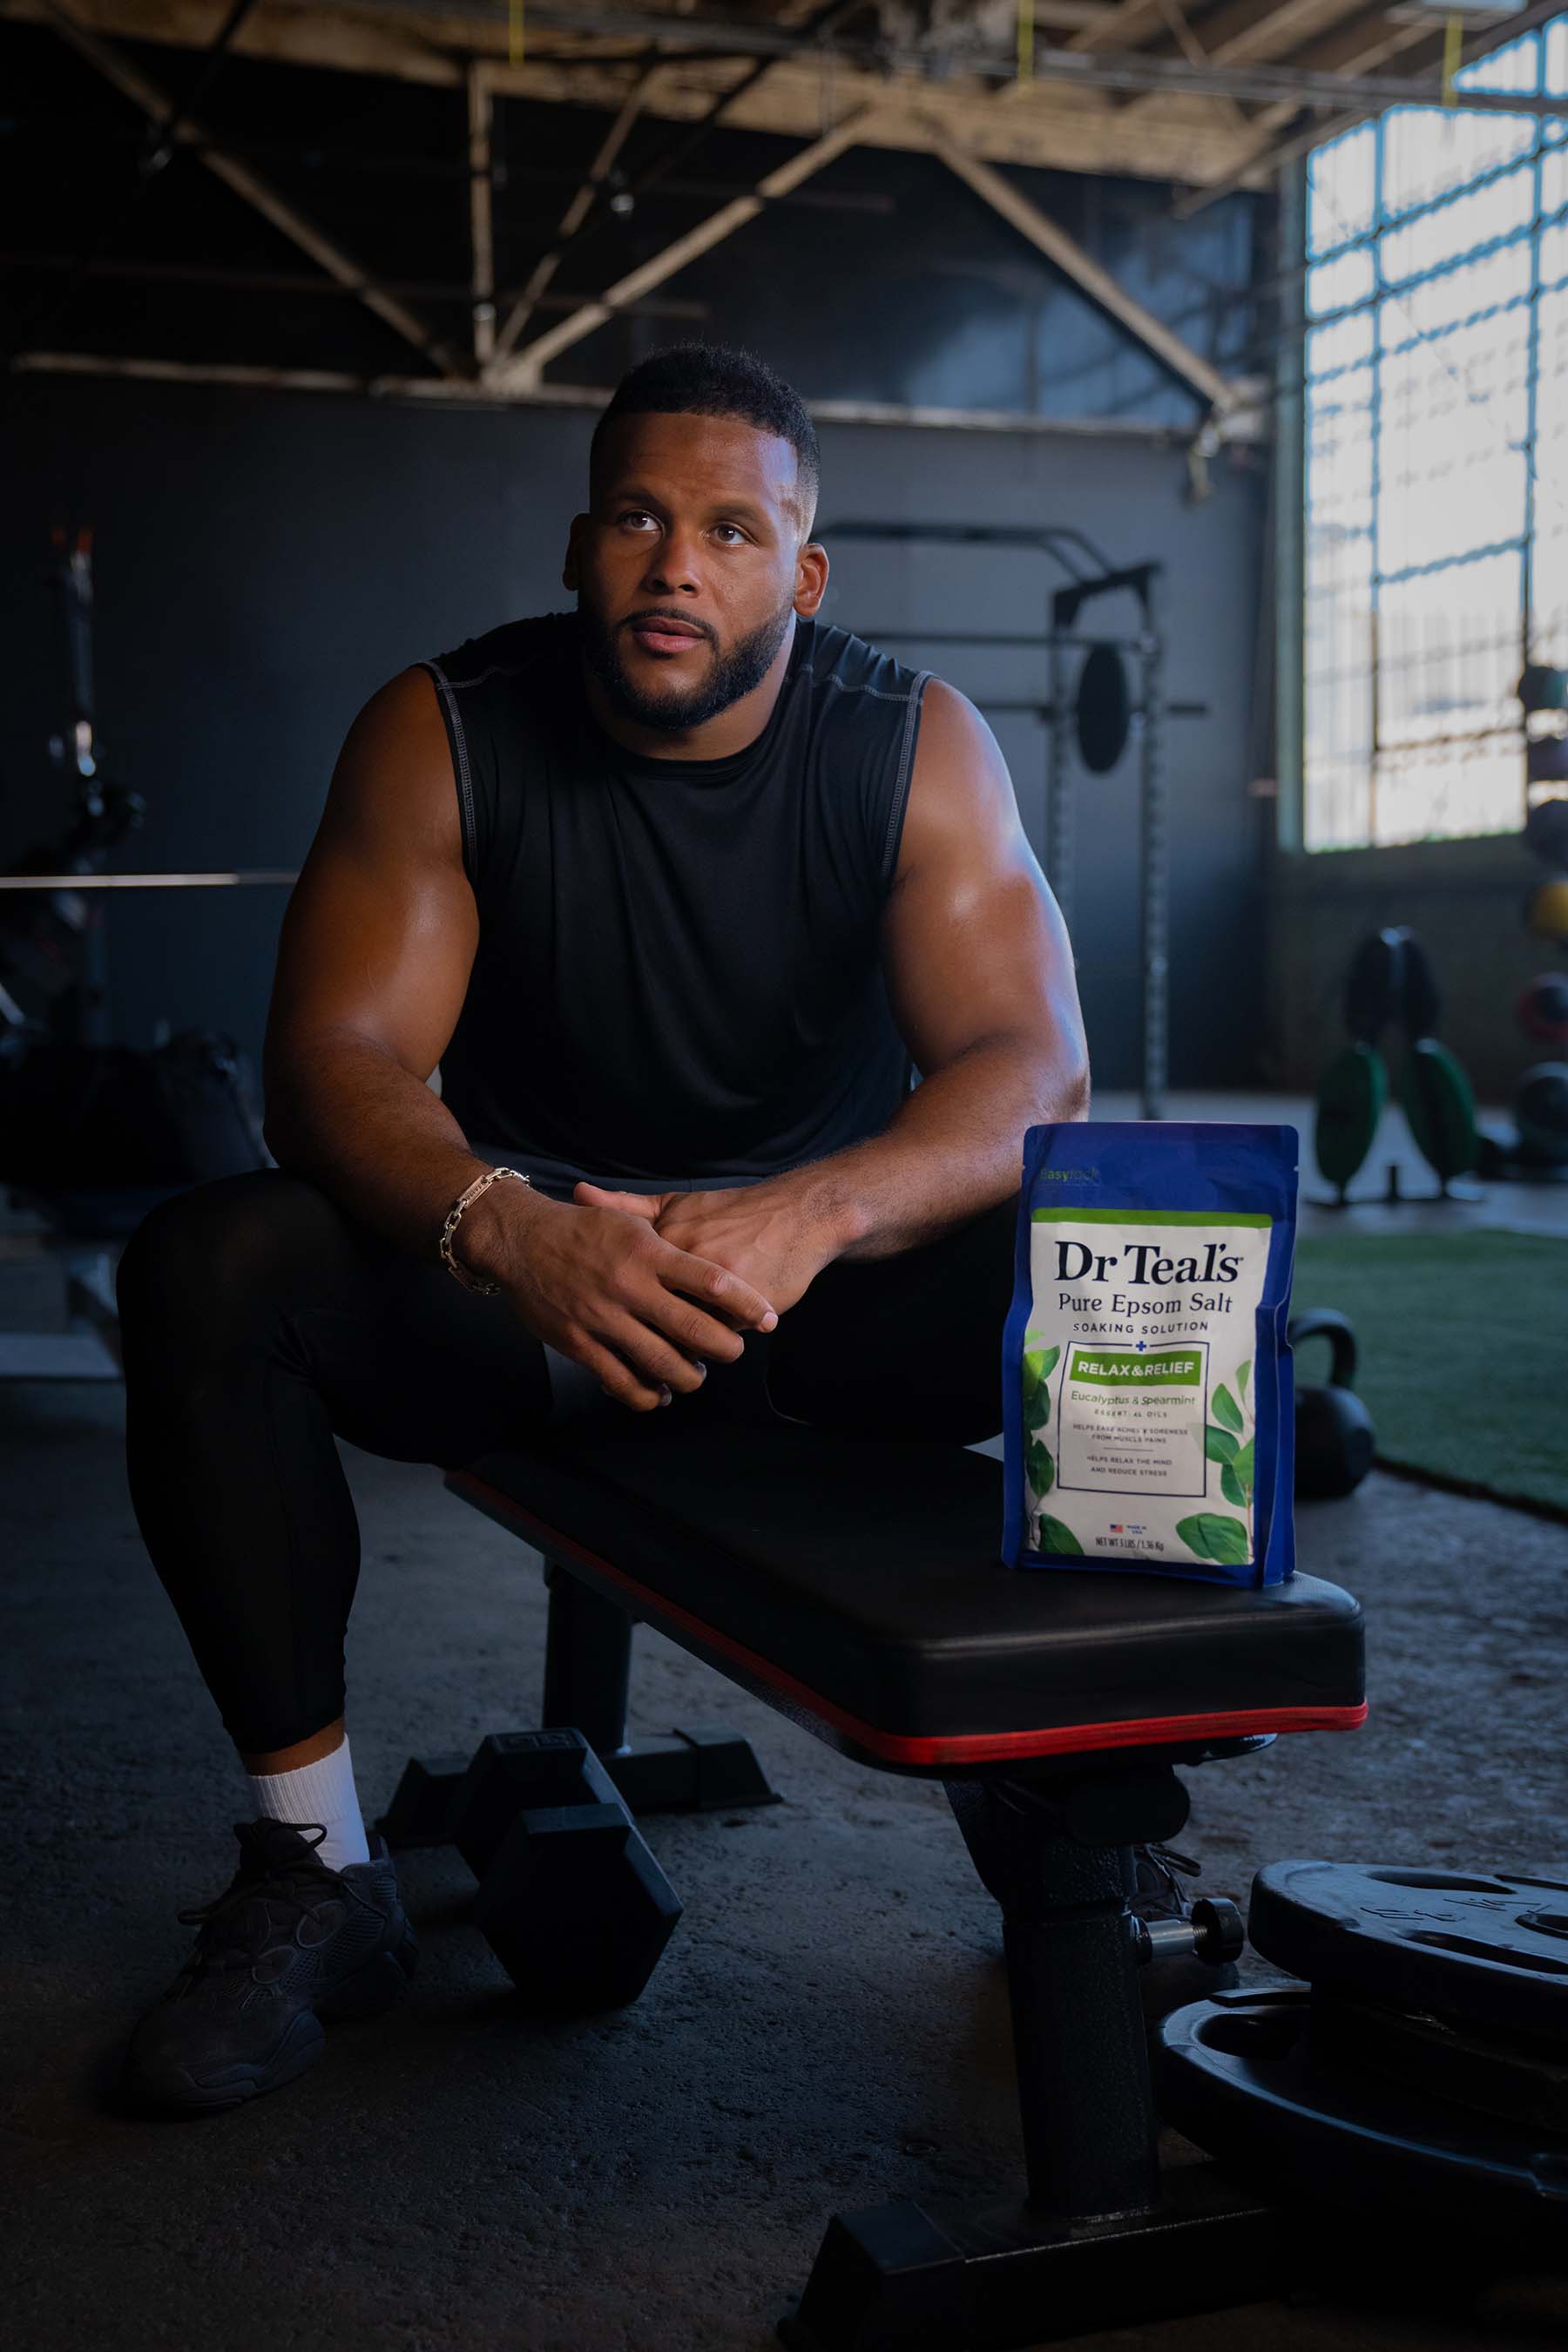 Dr Teal's has once again teamed up with three-time Defensive Player of the Year Aaron Donald to share the importance of muscle recovery.